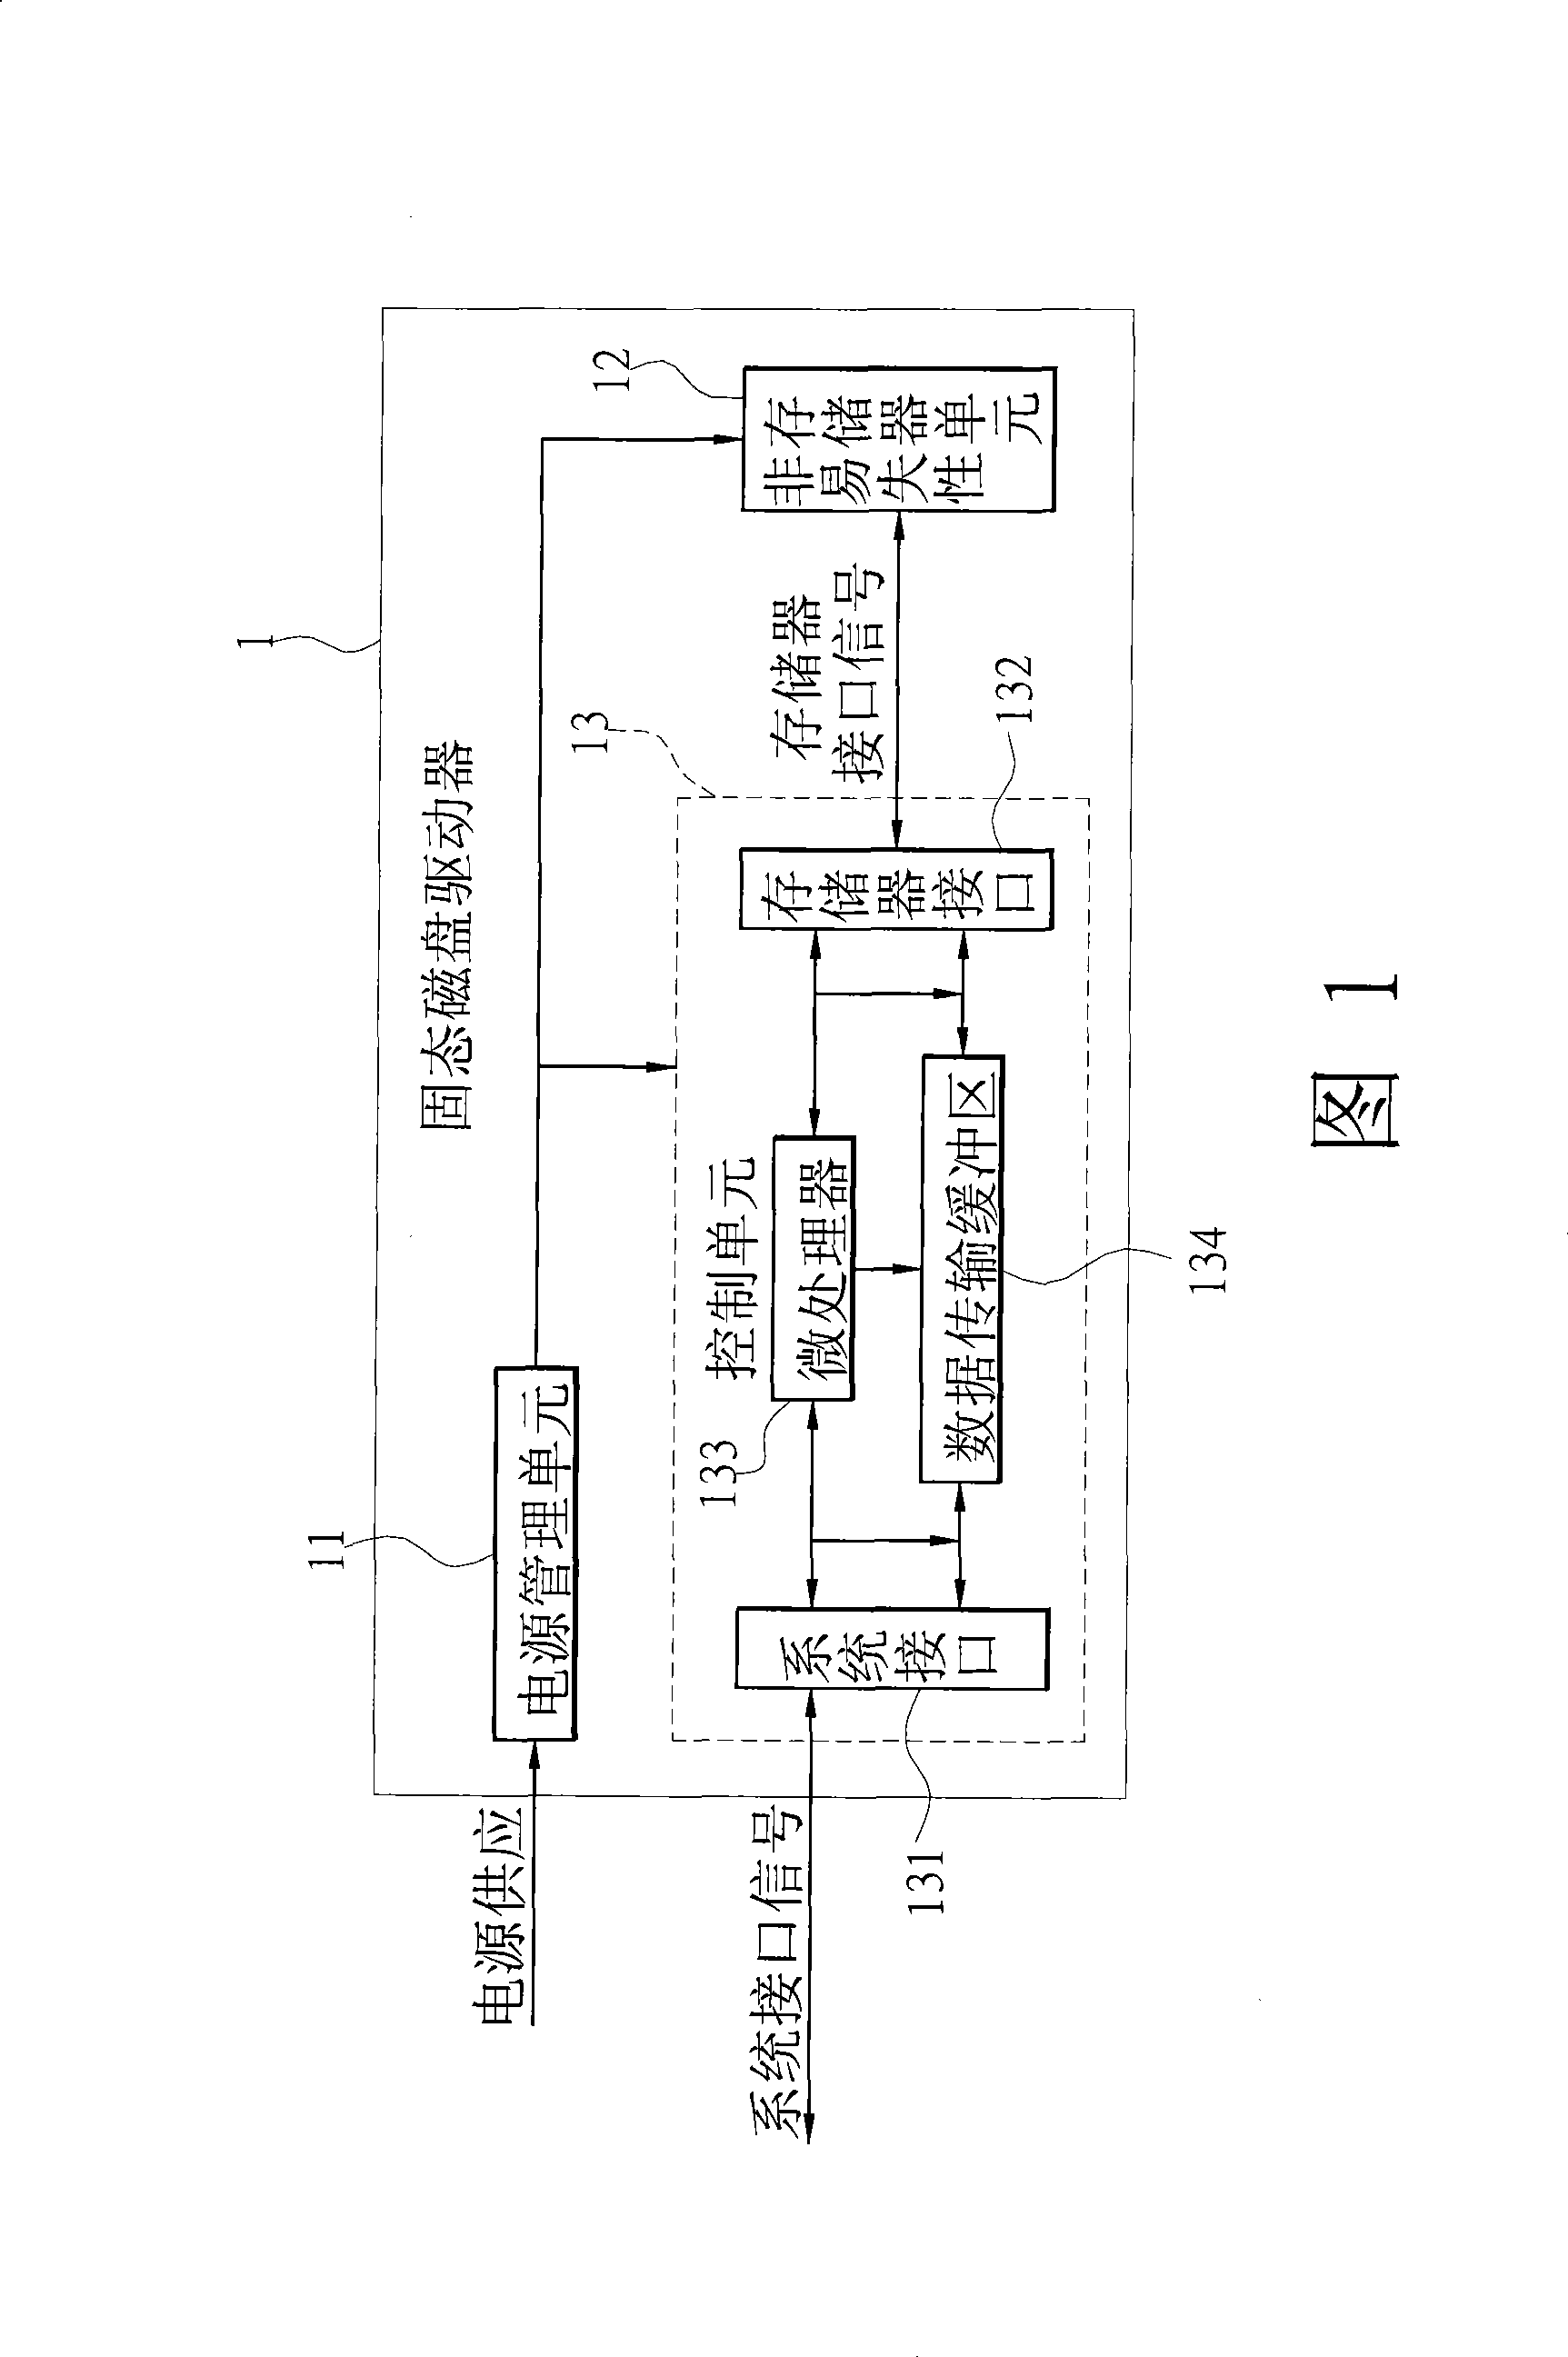 Solid state semiconductor memory mechanism and its application system and control assembly